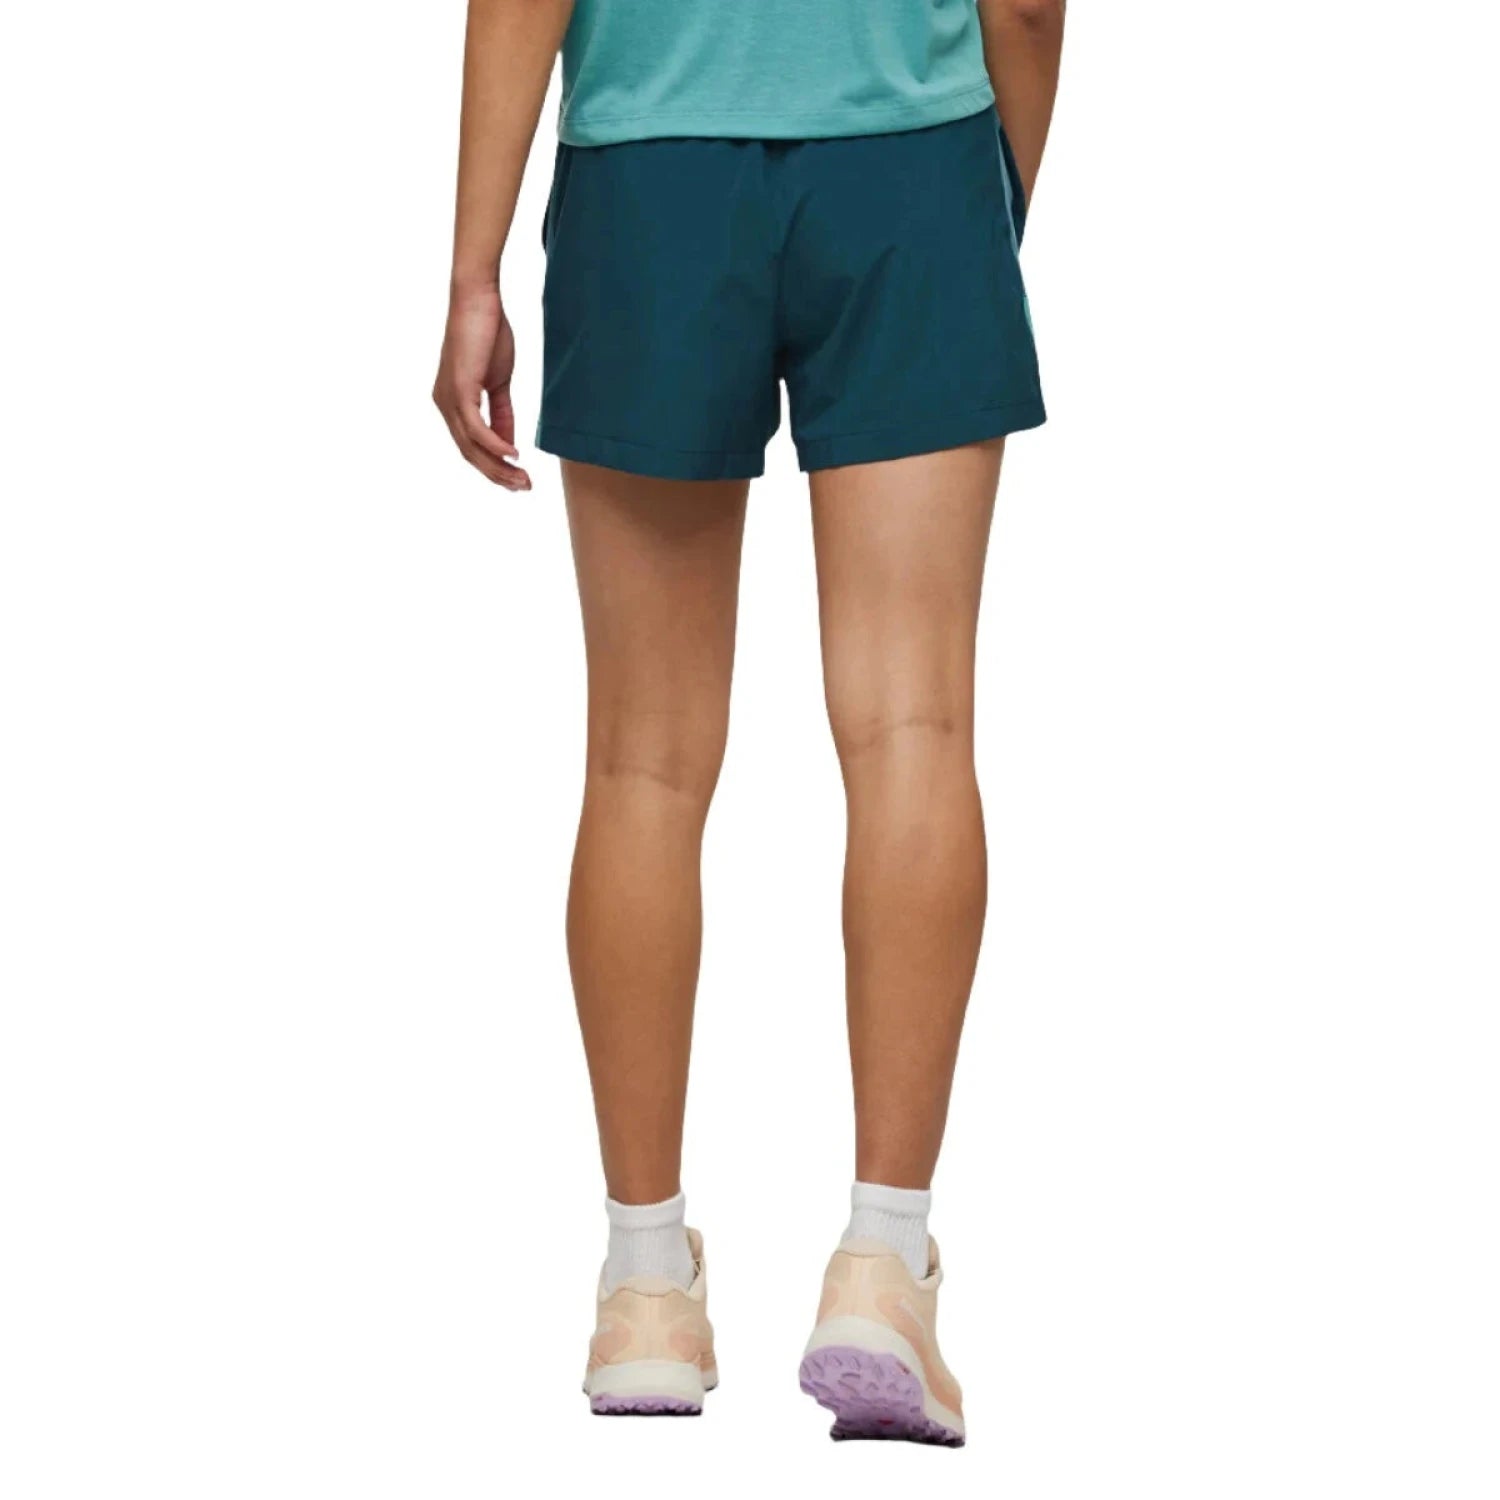 Cotopaxi Women's Cambio Short shown in the Abyss color option. Back view, on model.